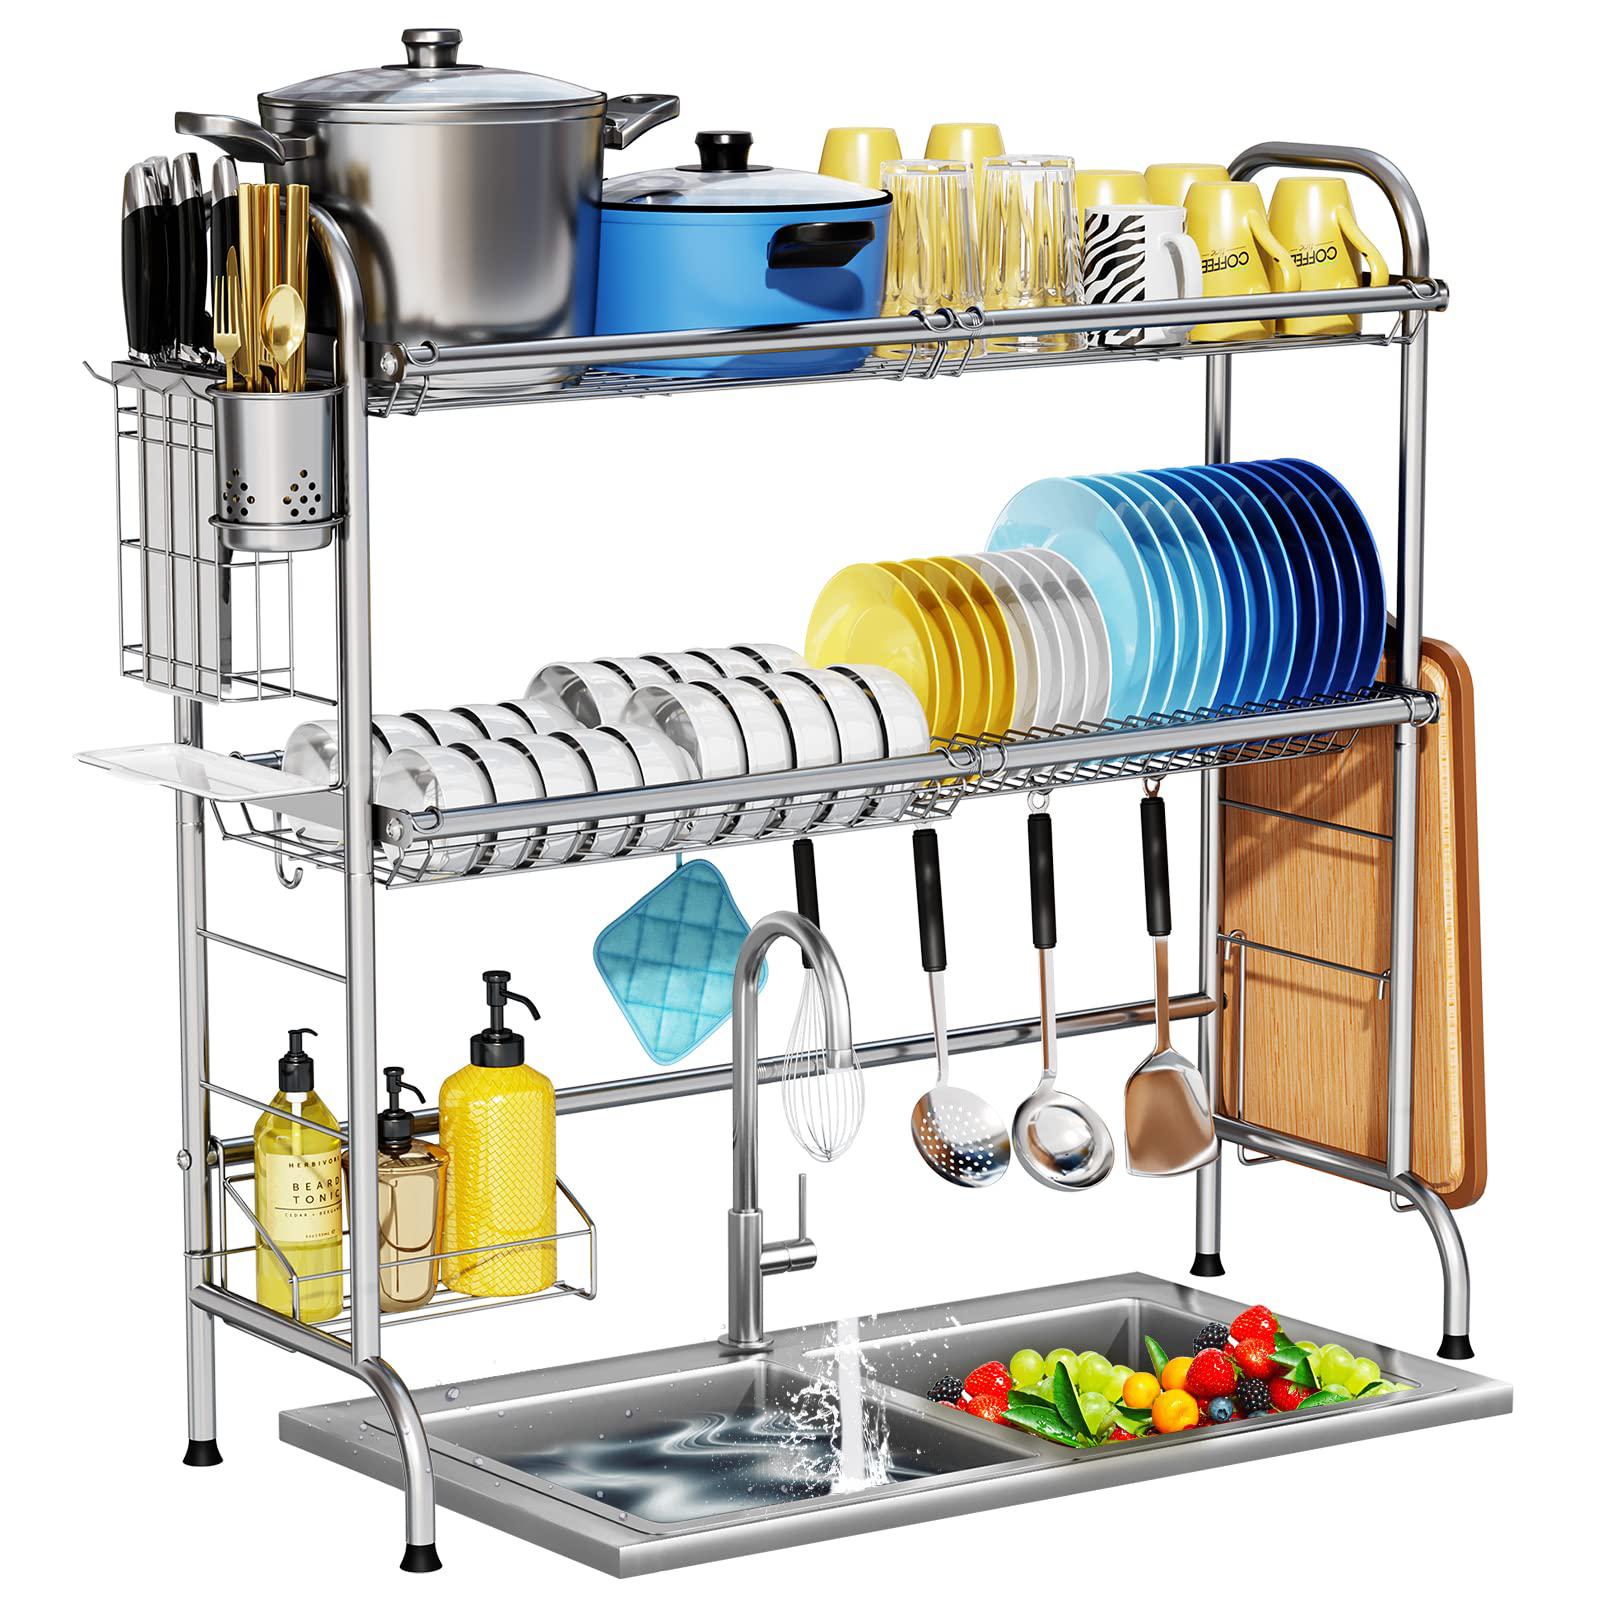 HOWDIA over the sink dish drying rack, howdia 2-tier stainless steel large over the sink dish rack with utensil holder dish drainers